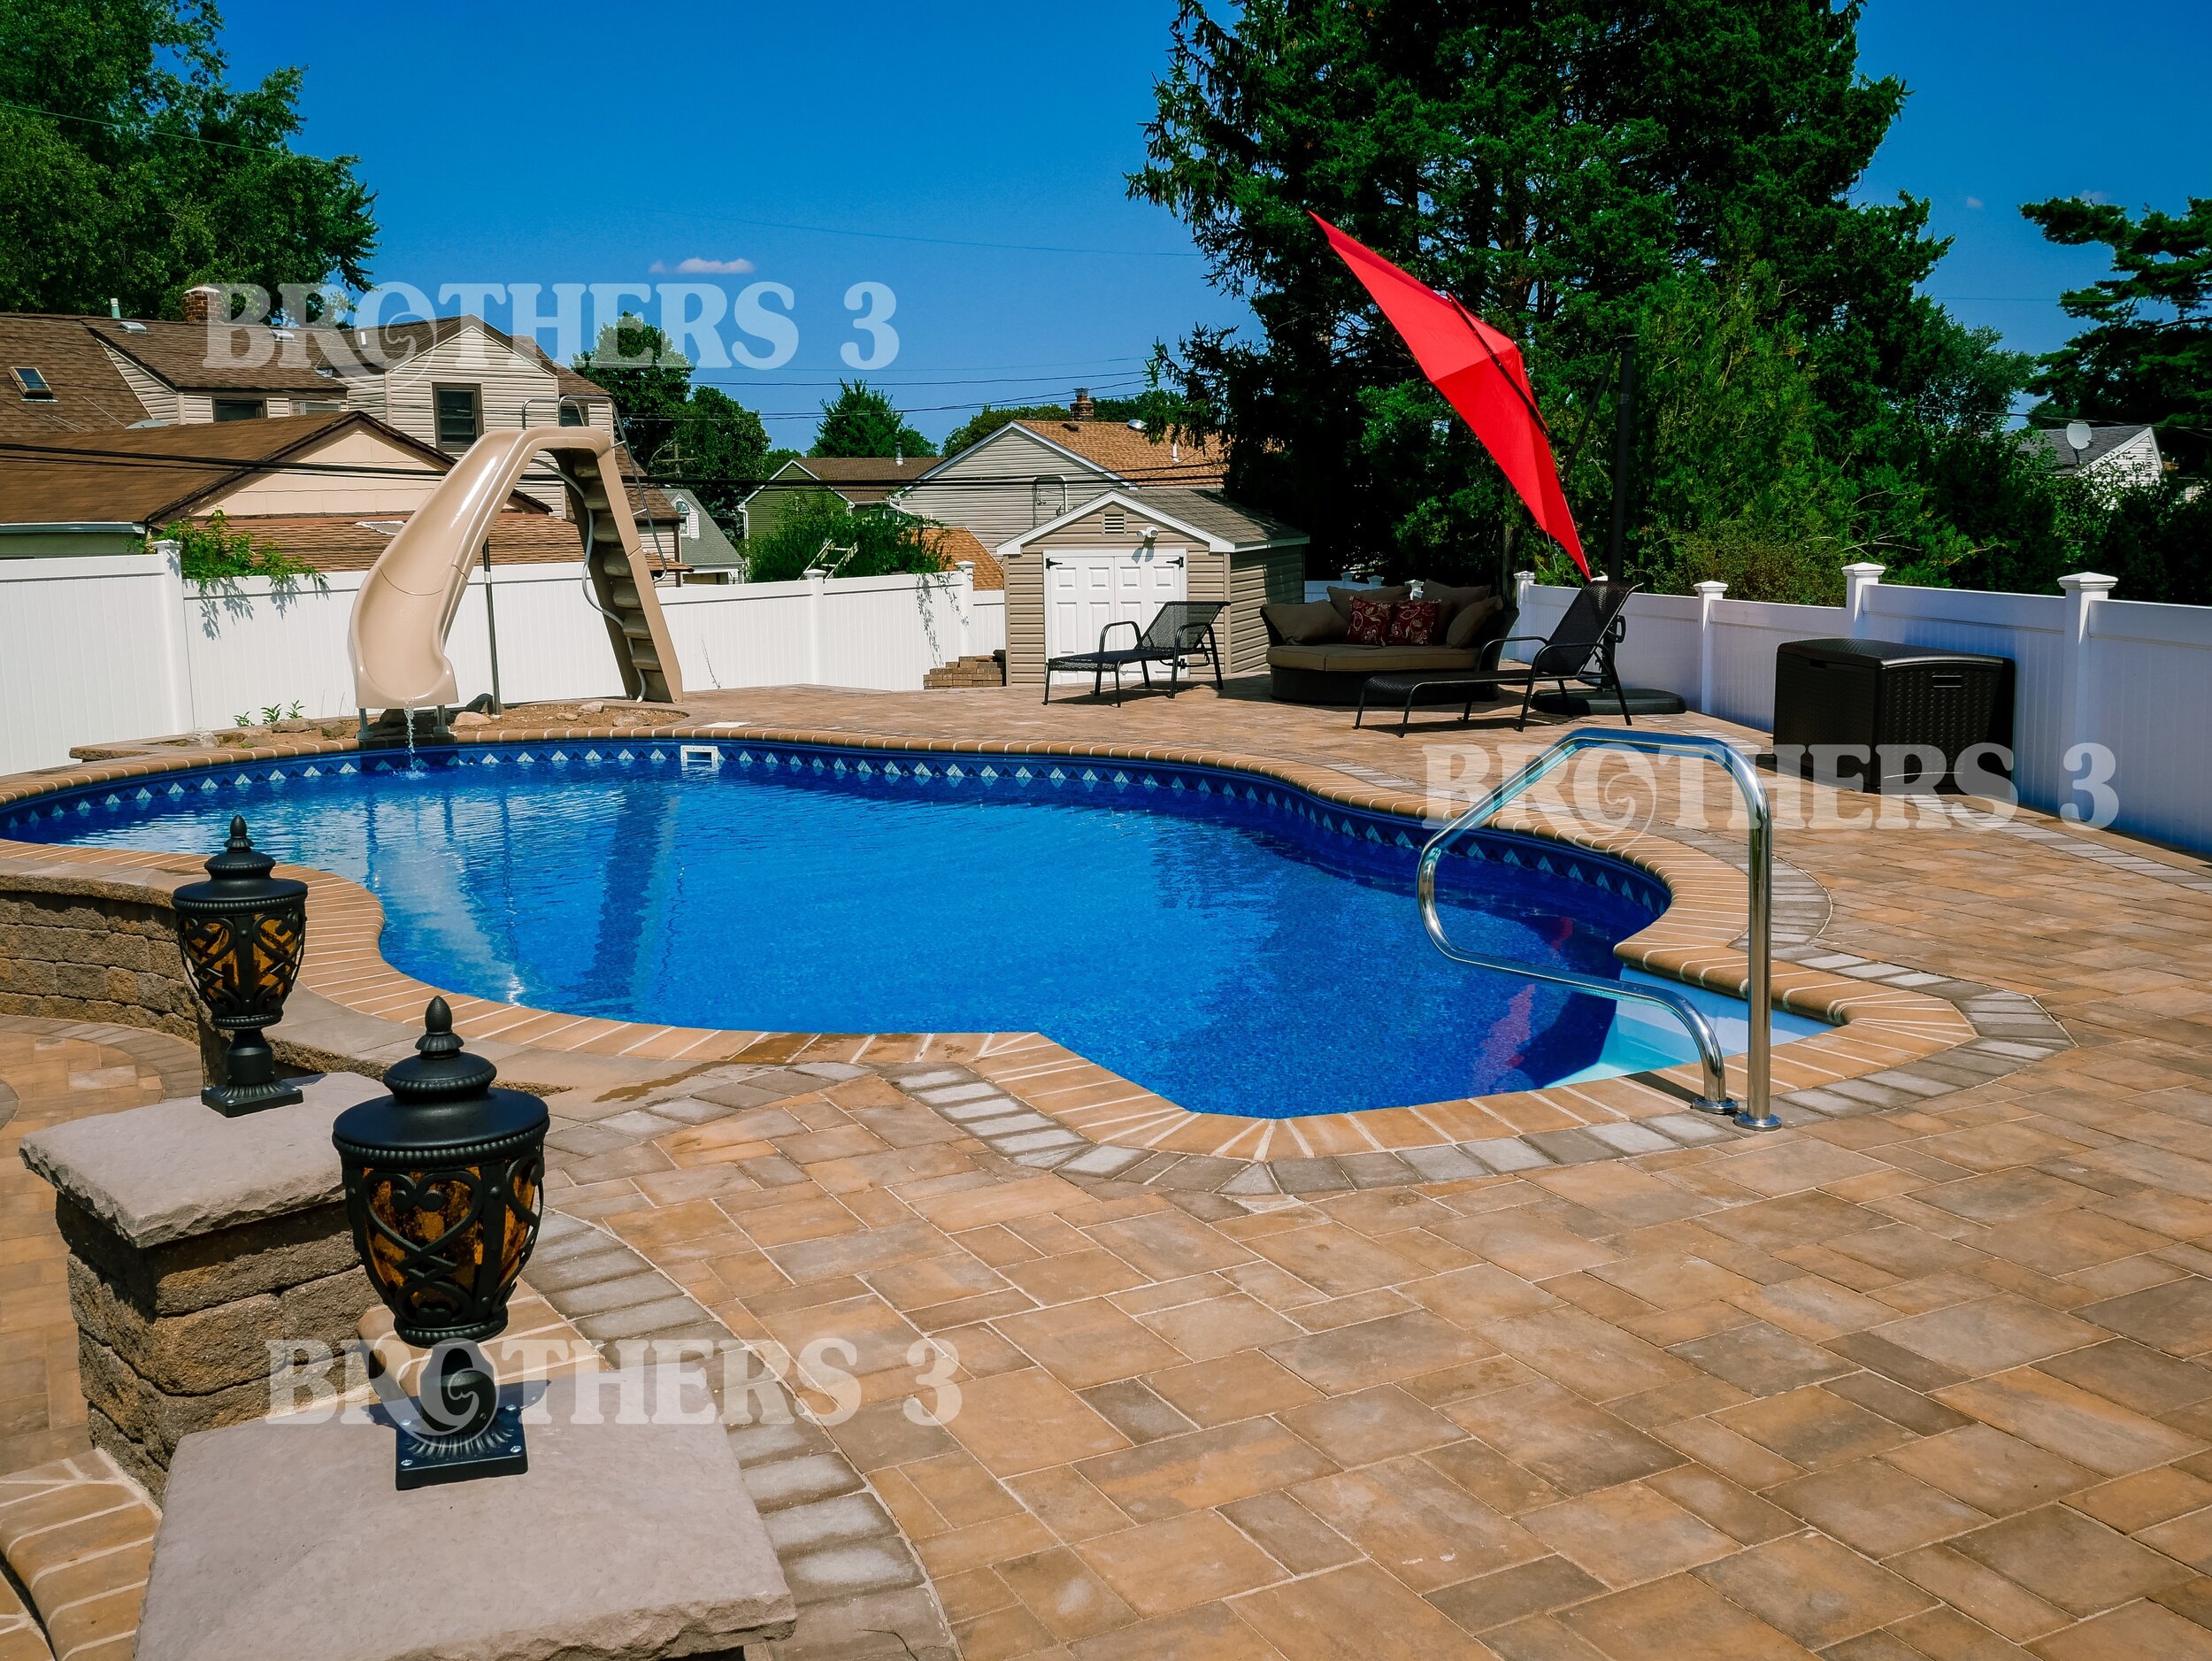 Radiant Pools Brothers 3, Long Island Inground Pool Cost